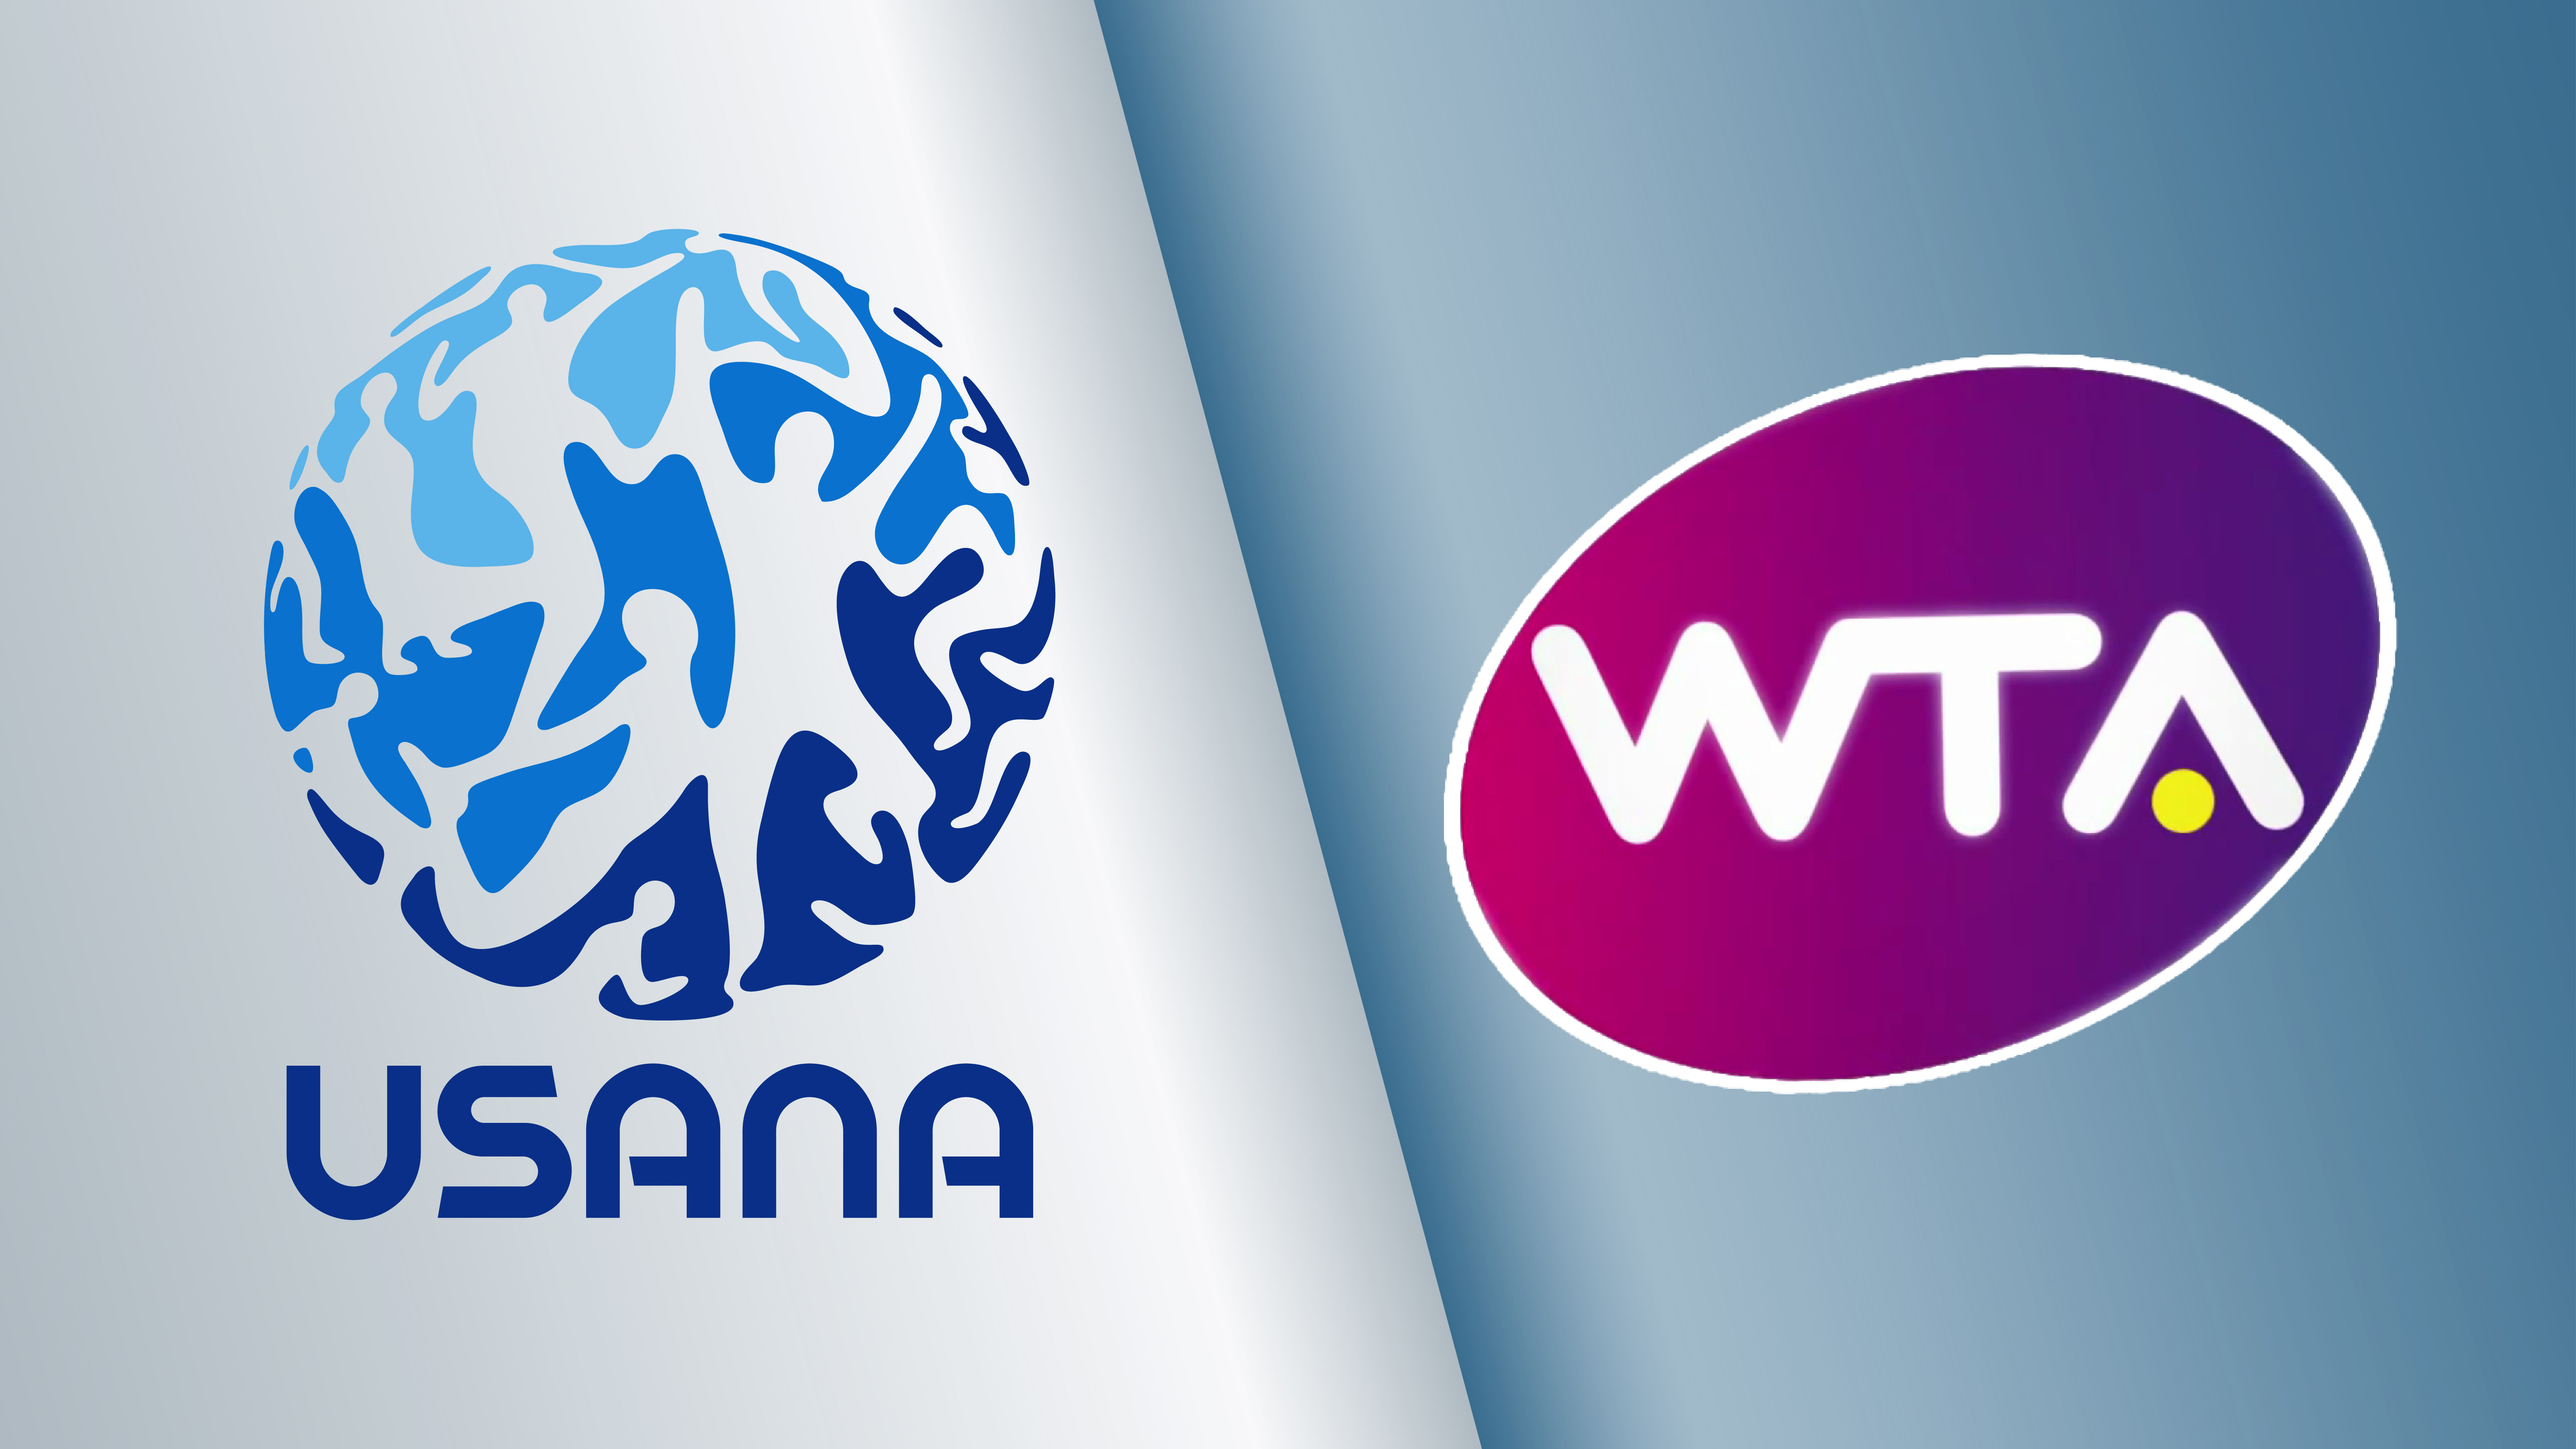 A Lasting Partnership with the WTA - What's Up, USANA?